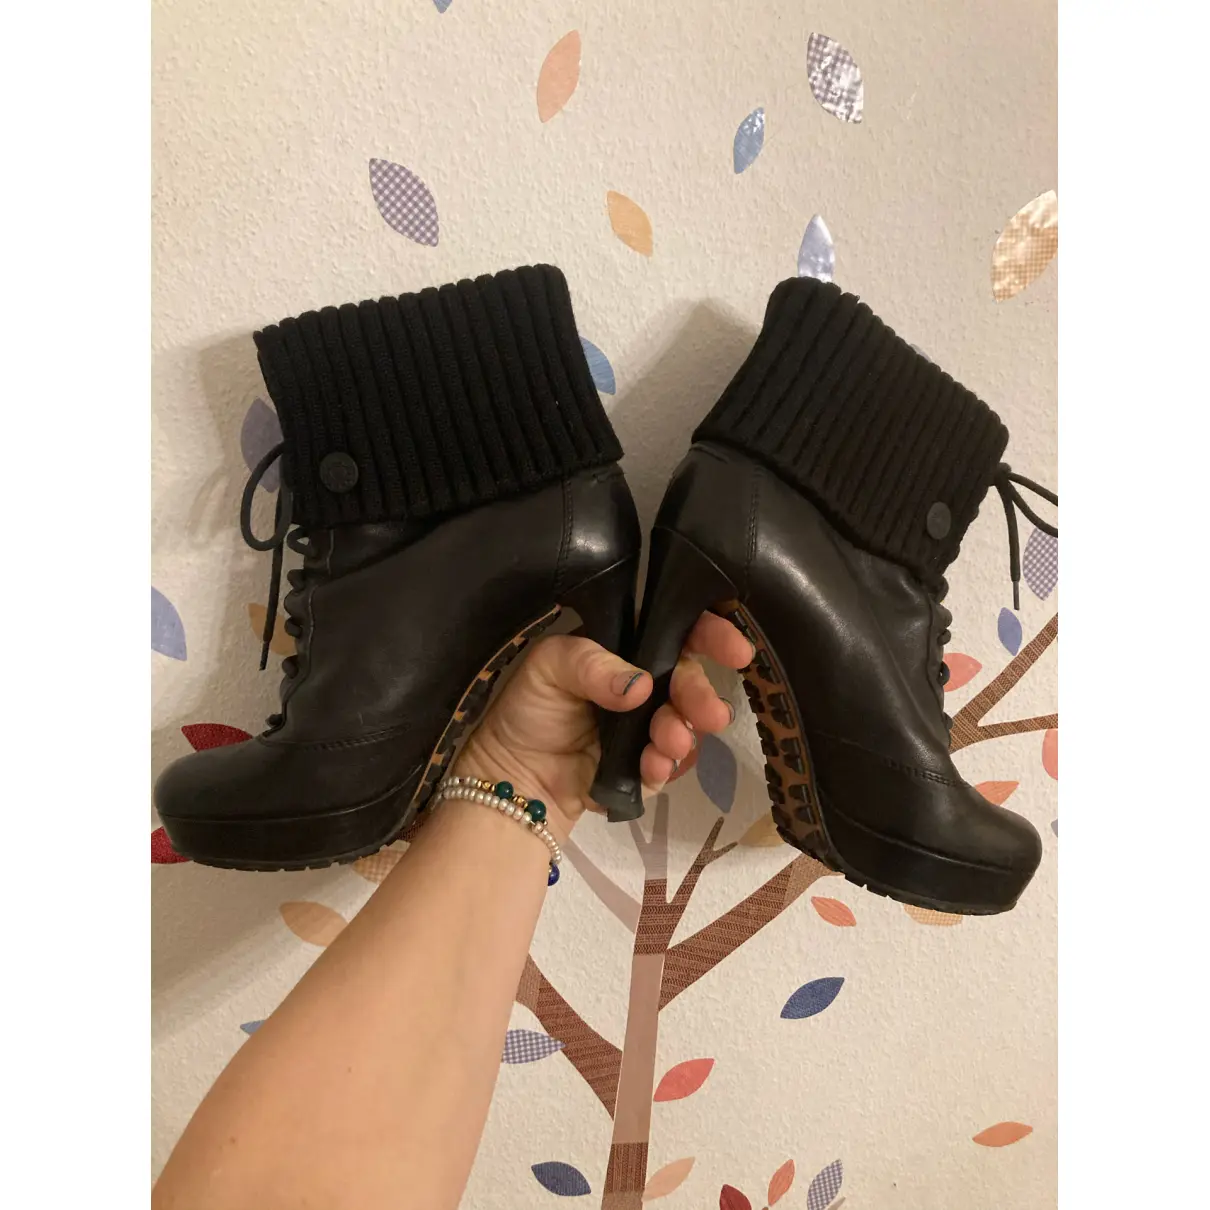 Luxury Gucci Ankle boots Women